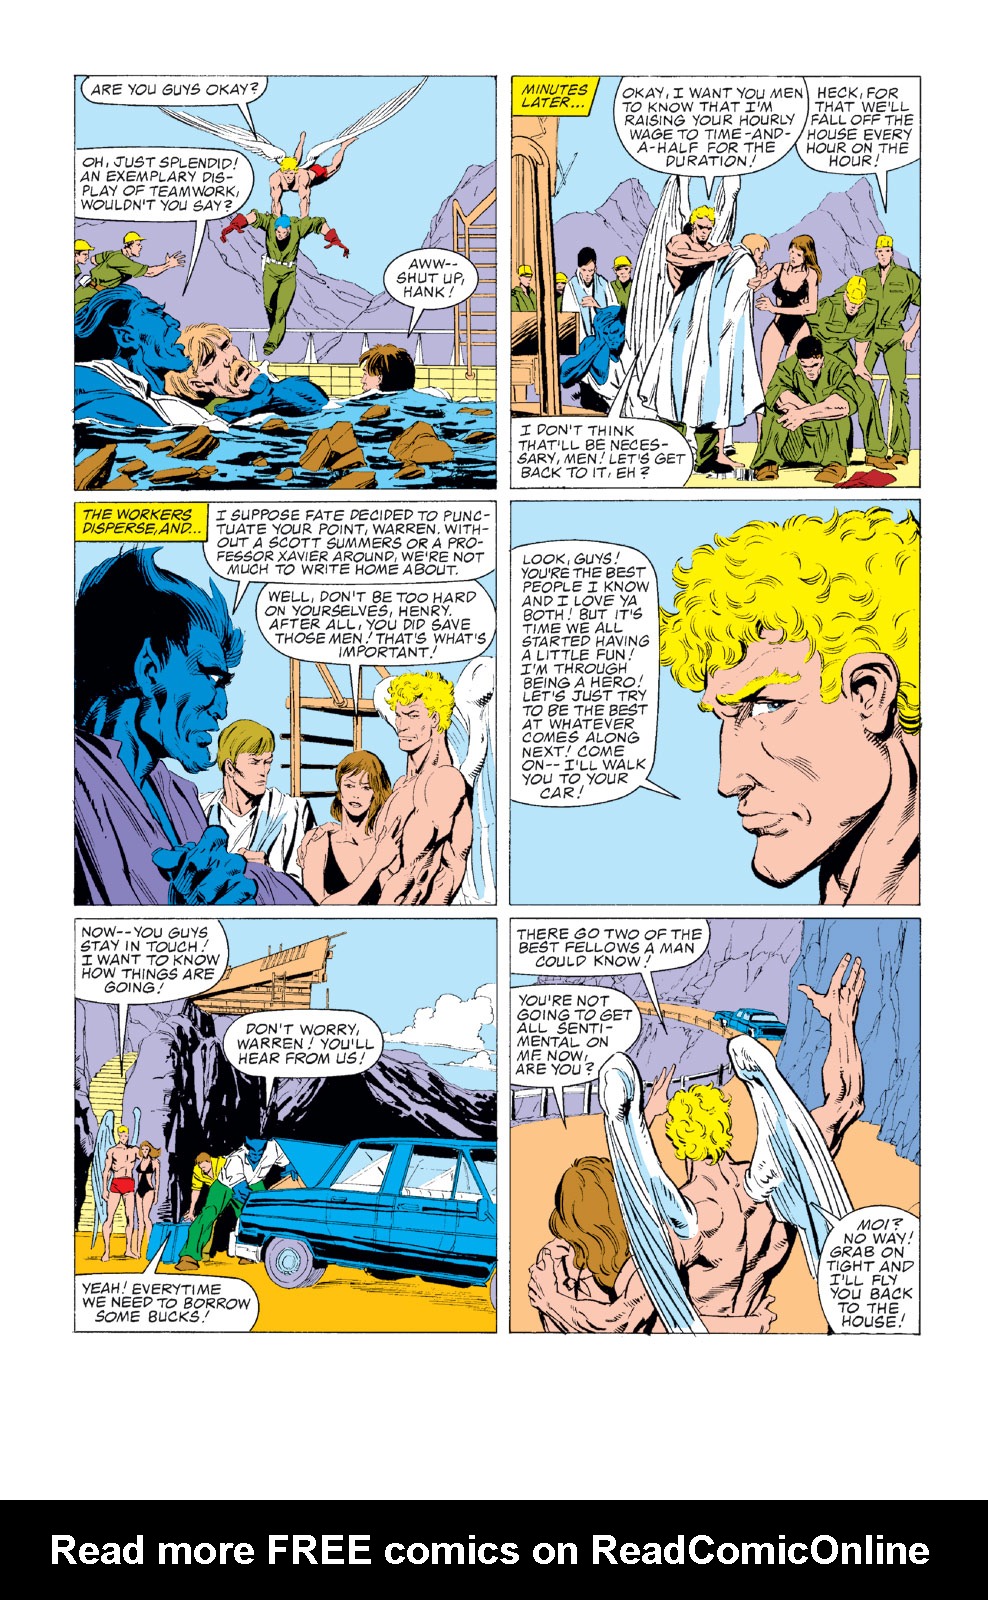 X-Factor (1986) 1 Page 8